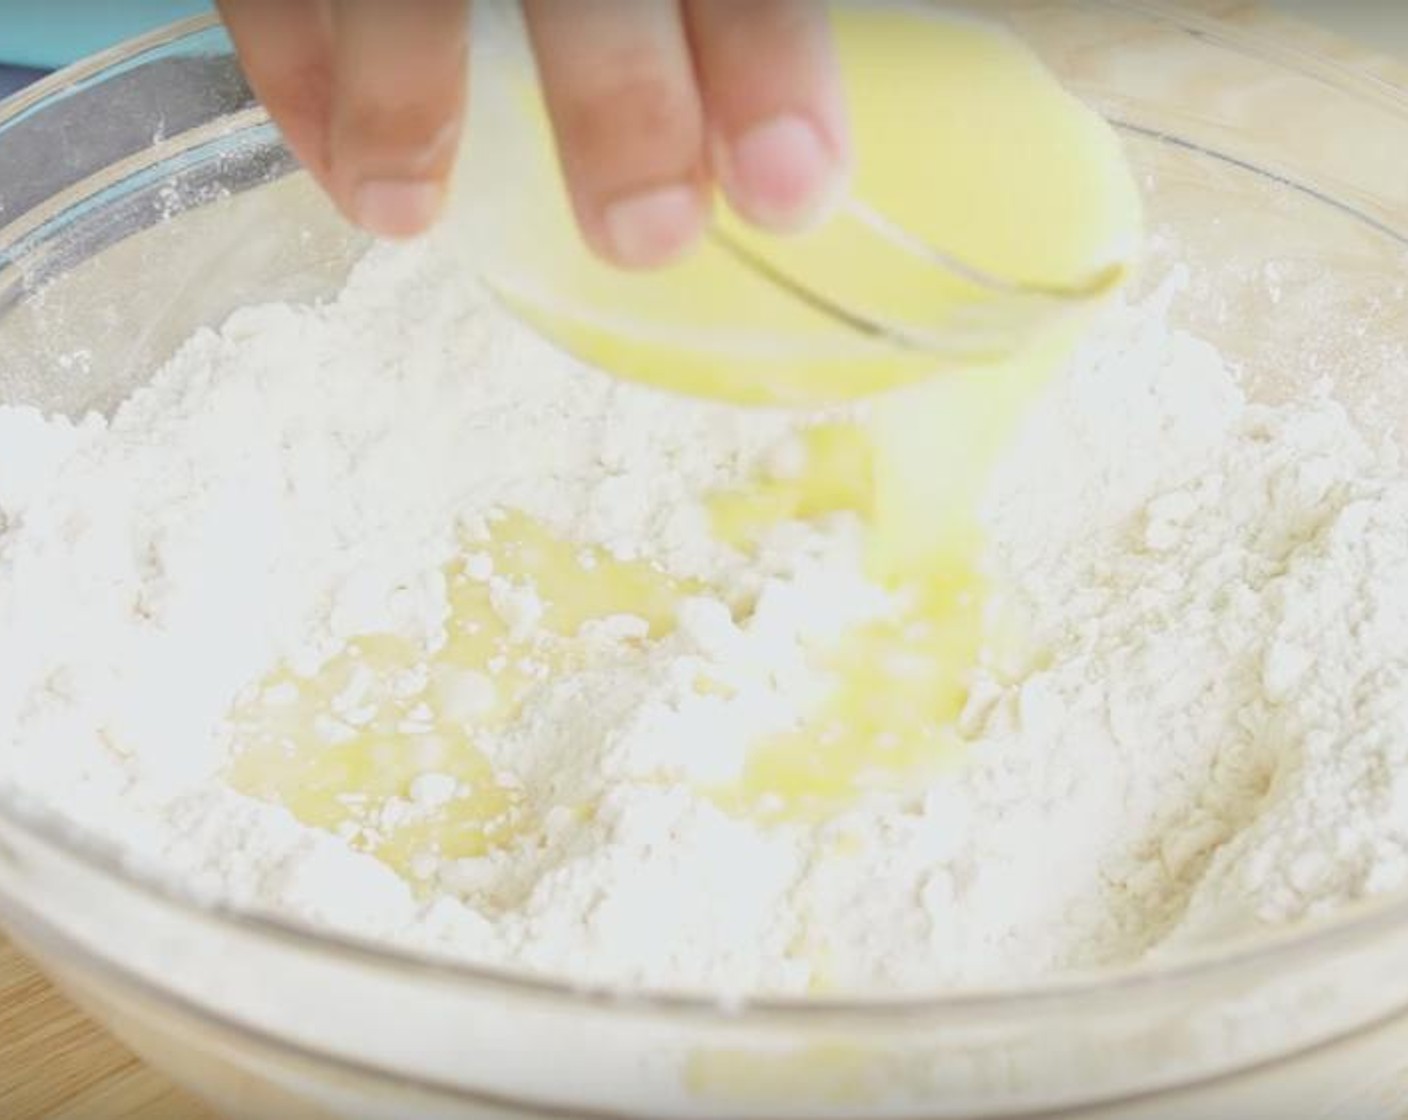 step 2 Beat together Egg (1), Water (1/3 cup), and Distilled White Vinegar (1 Tbsp) in a small bowl with a fork. Add to flour mixture, use your hand and mix in the bowl until it forms a dough. Knead it a little until the dough comes together.